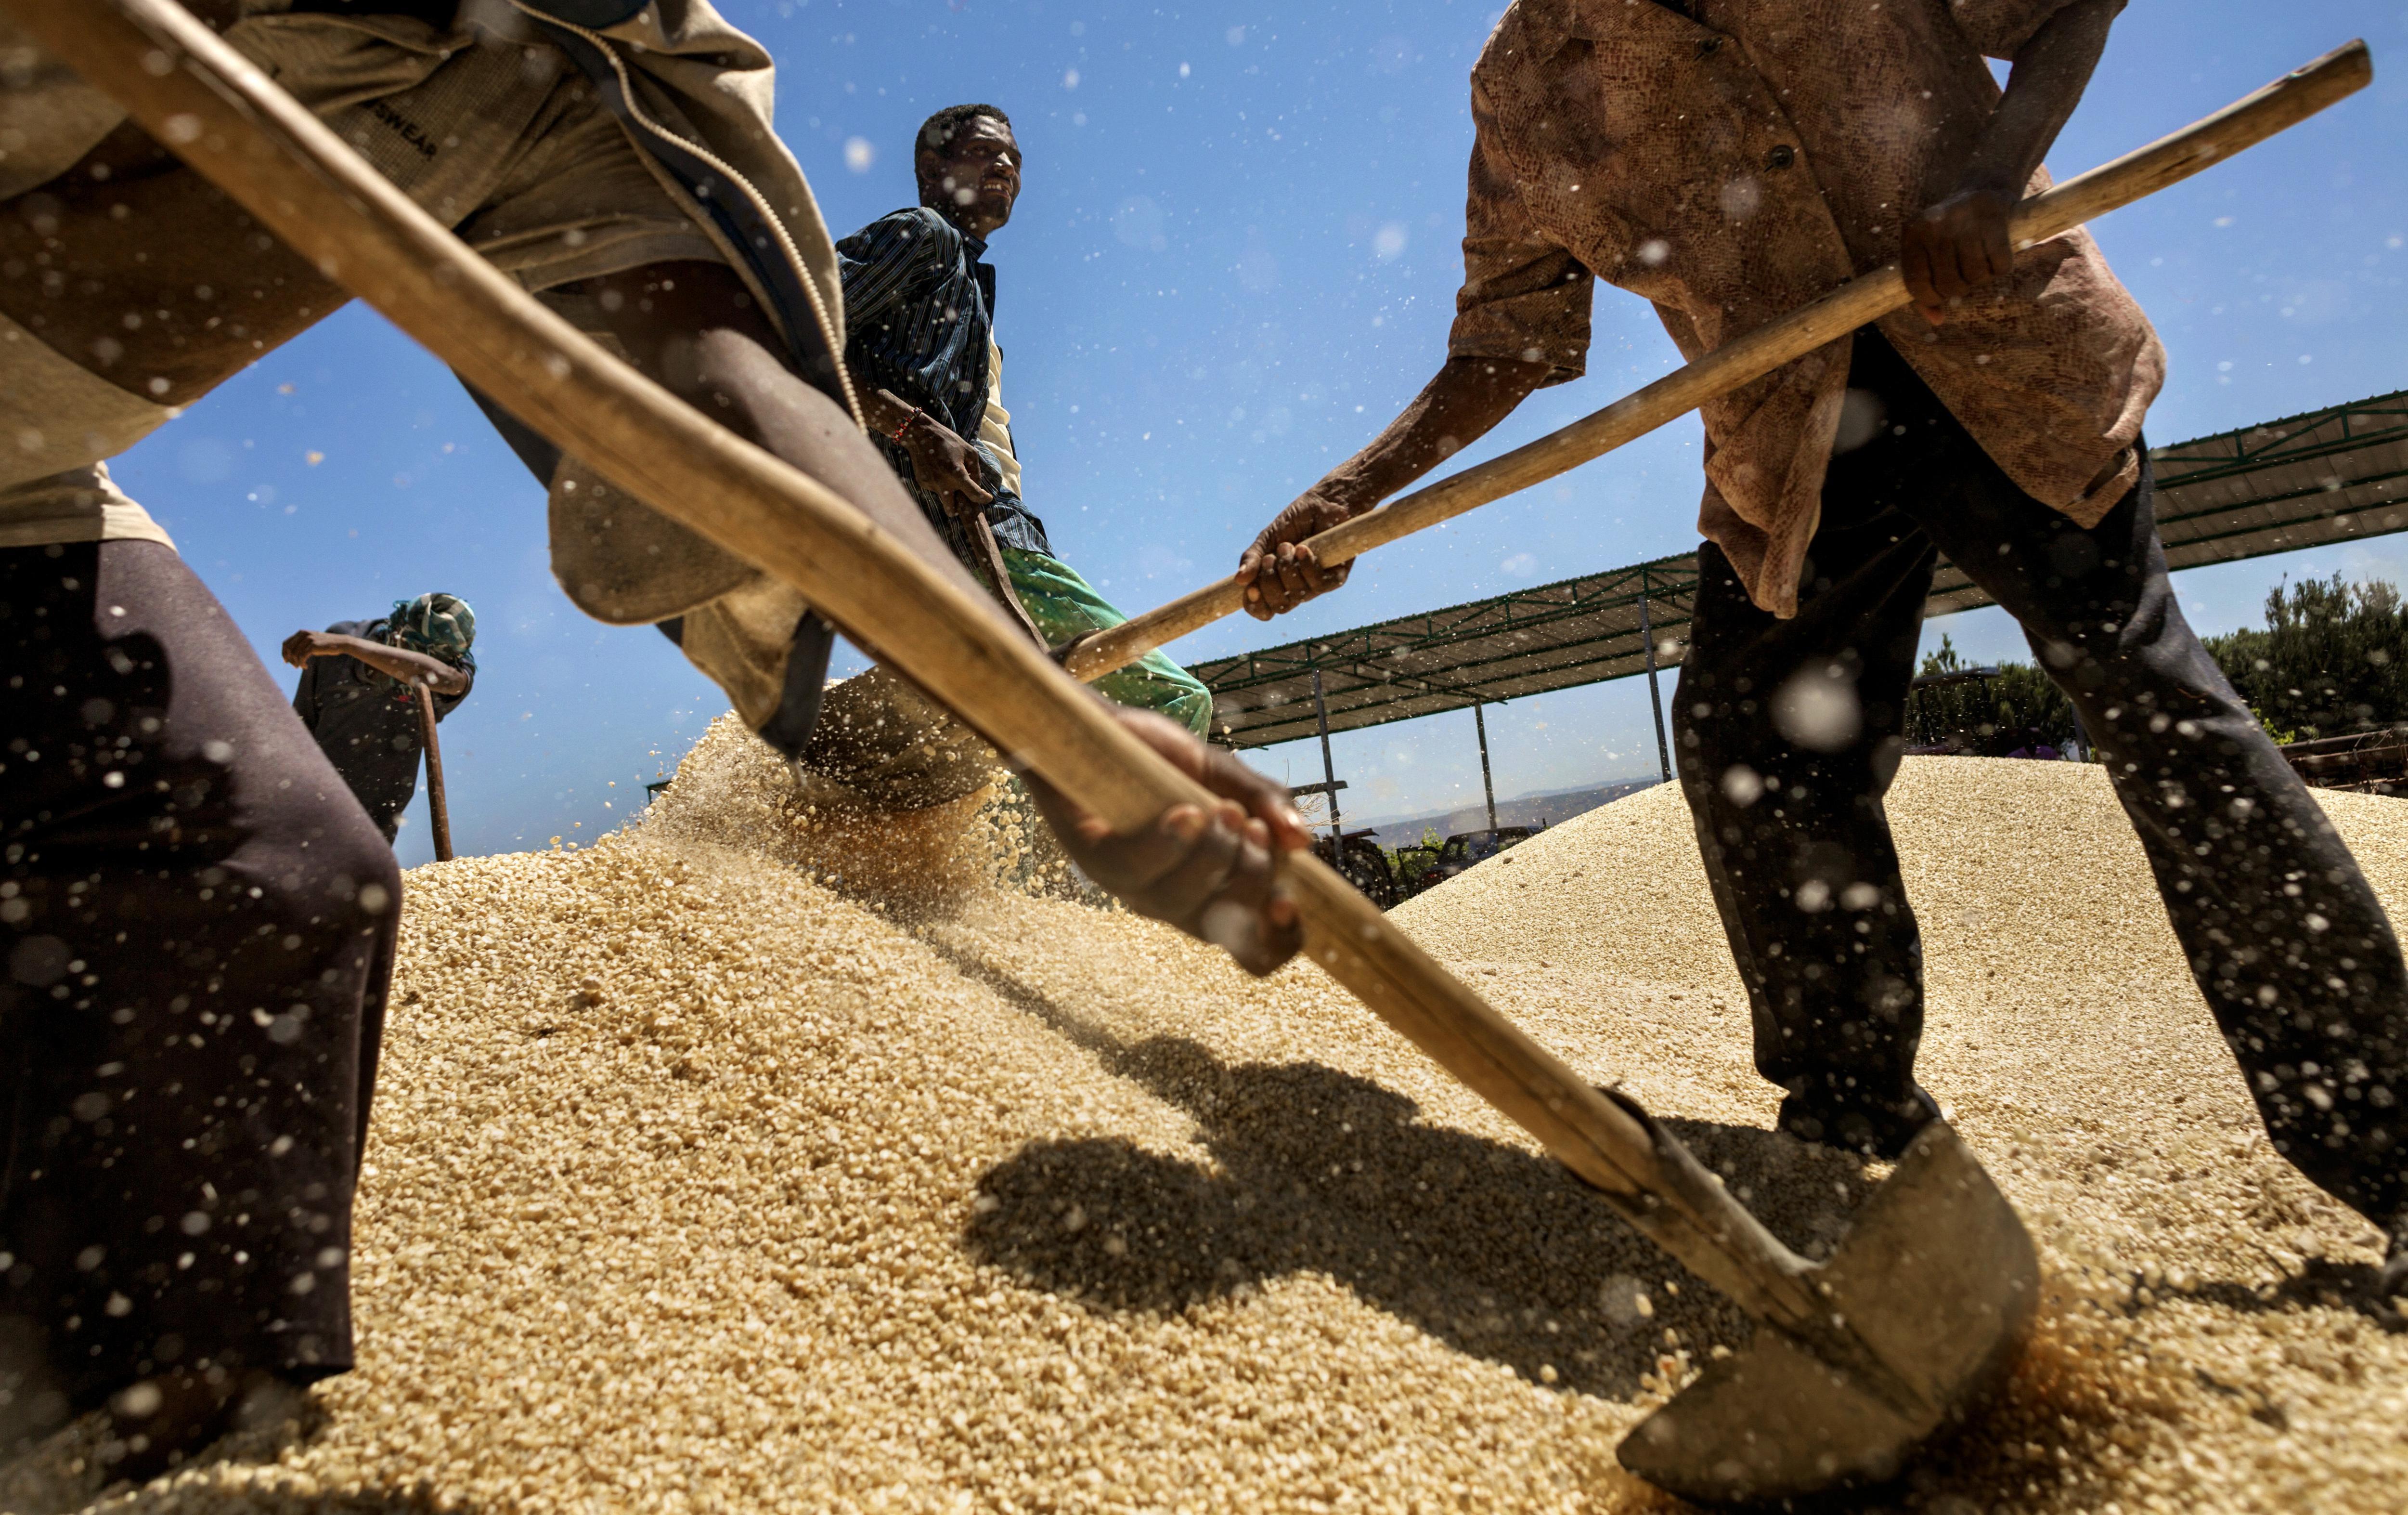 Staff at Robani Agriculture Enteprises in Ethiopia remove maize from the cob then separate the husks.